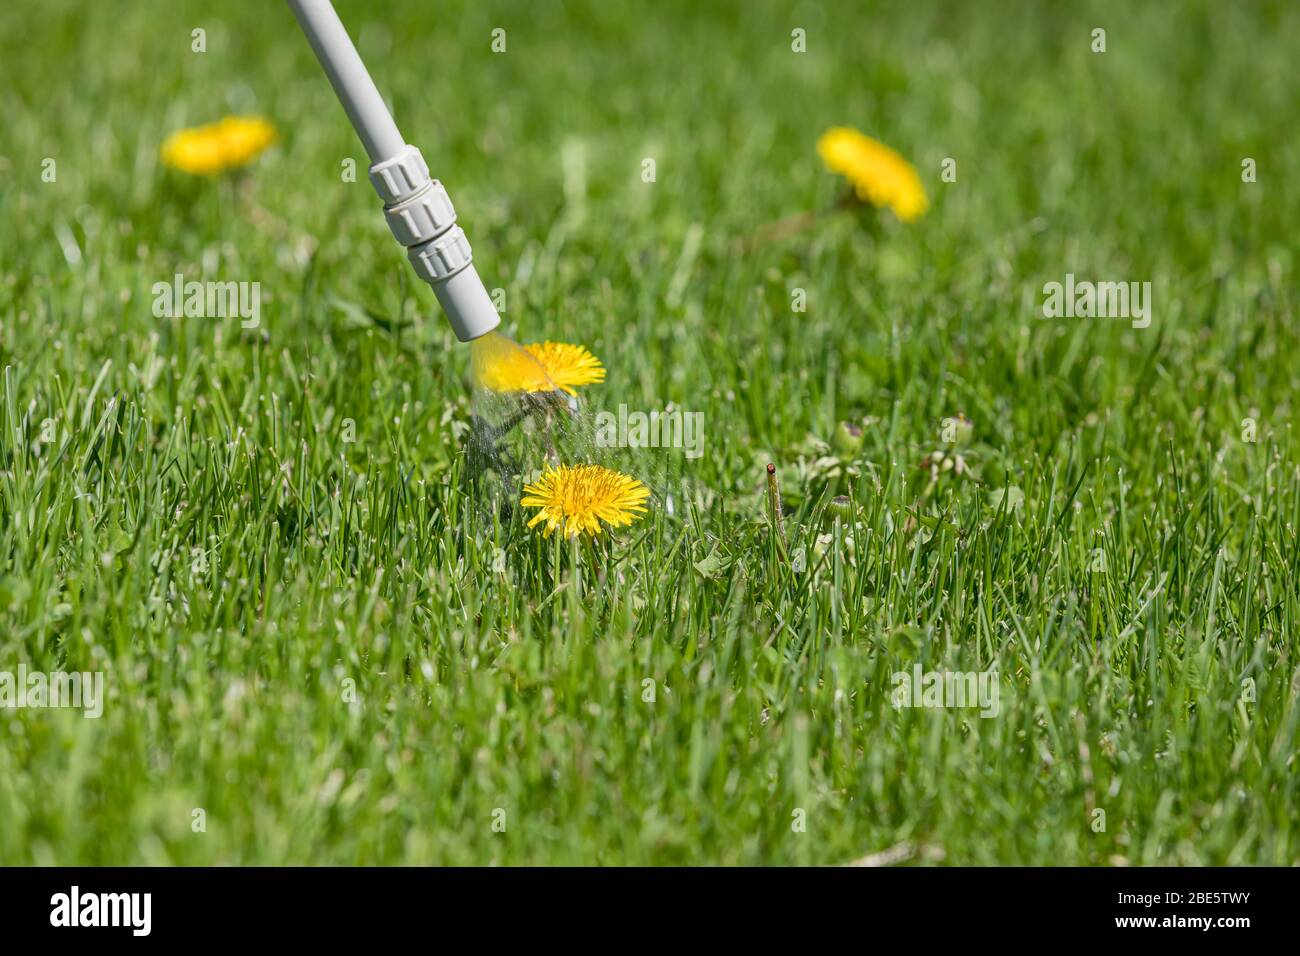 Dandelion weed in lawn and spraying weed killer herbicide. Home lawn care landscaping concept Stock Photo